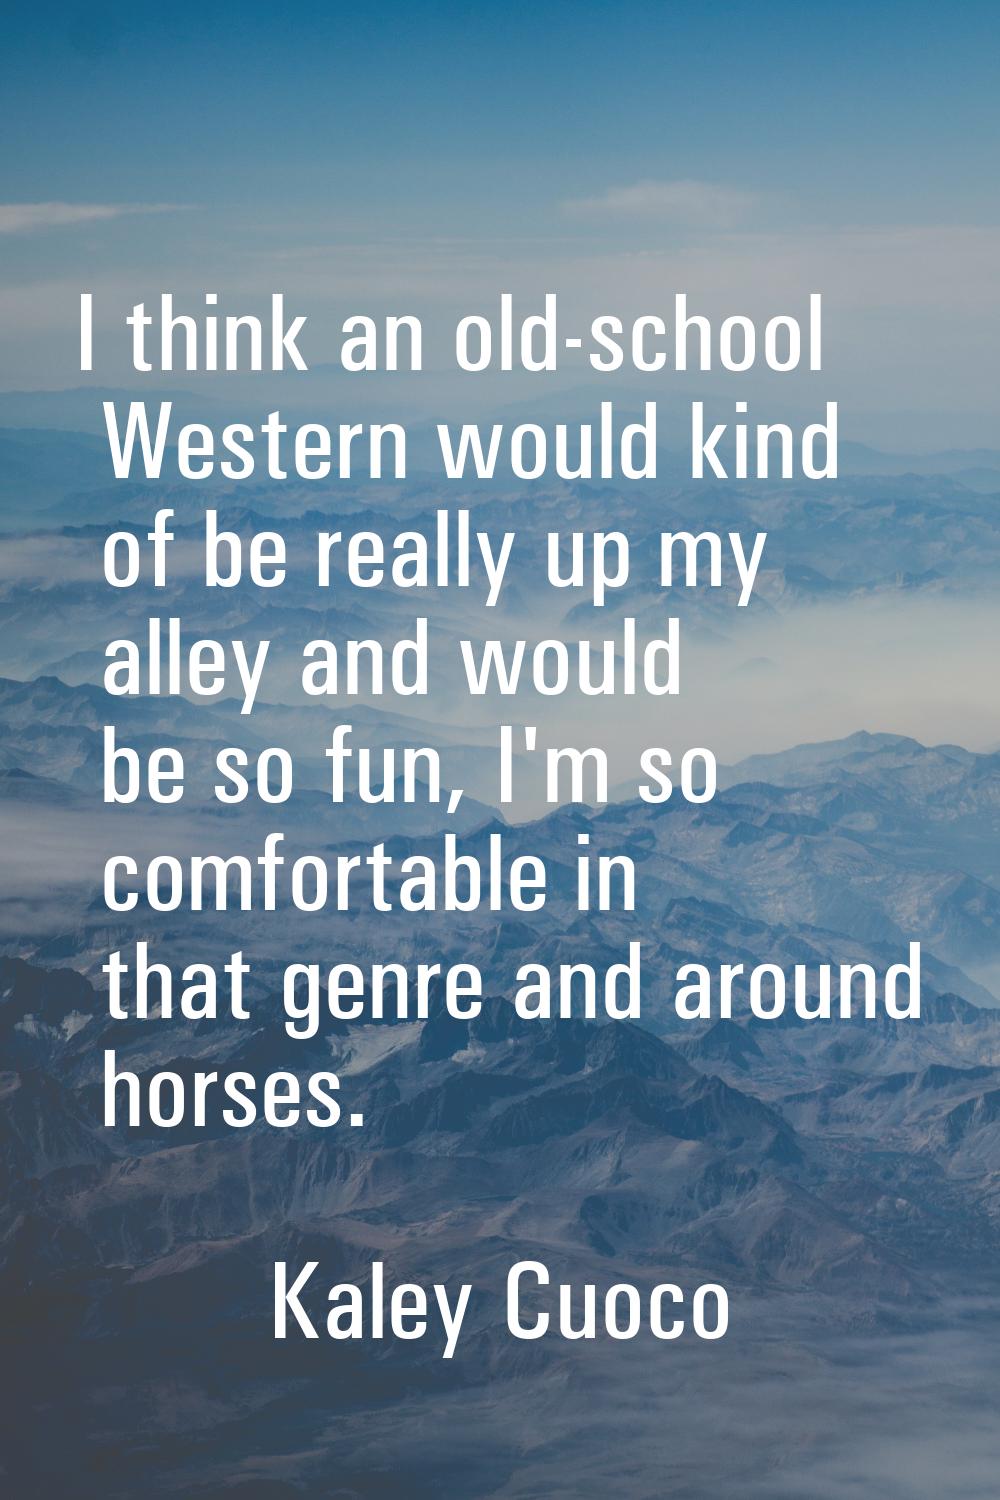 I think an old-school Western would kind of be really up my alley and would be so fun, I'm so comfo